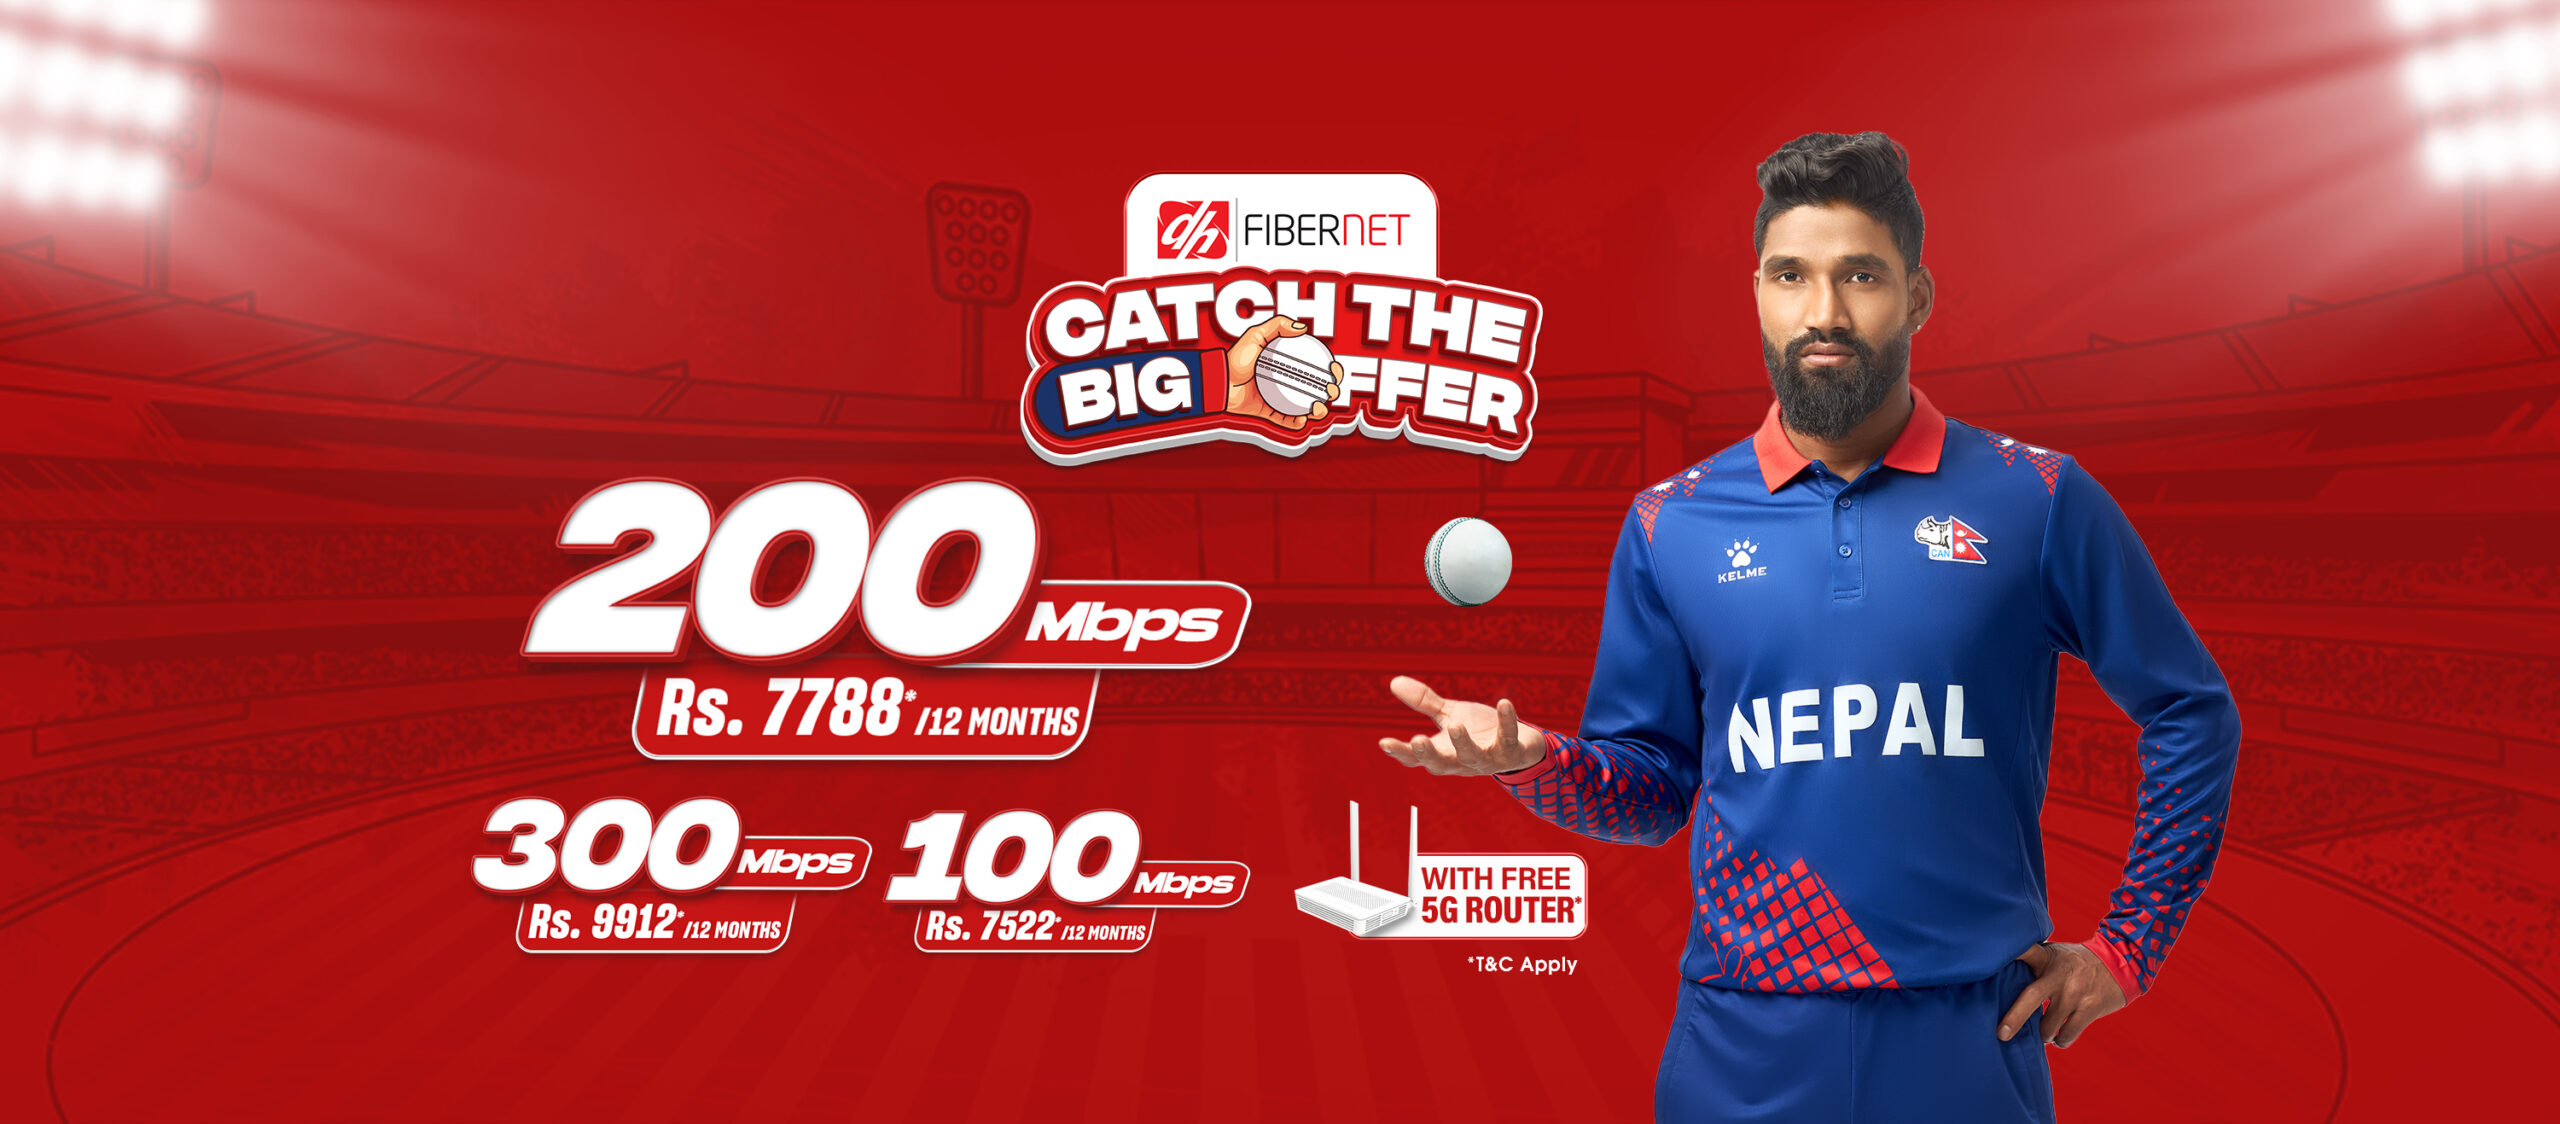 DishHome FiberNet unveils ‘Catch the Big Offer,’ revolutionizing the ISP industry